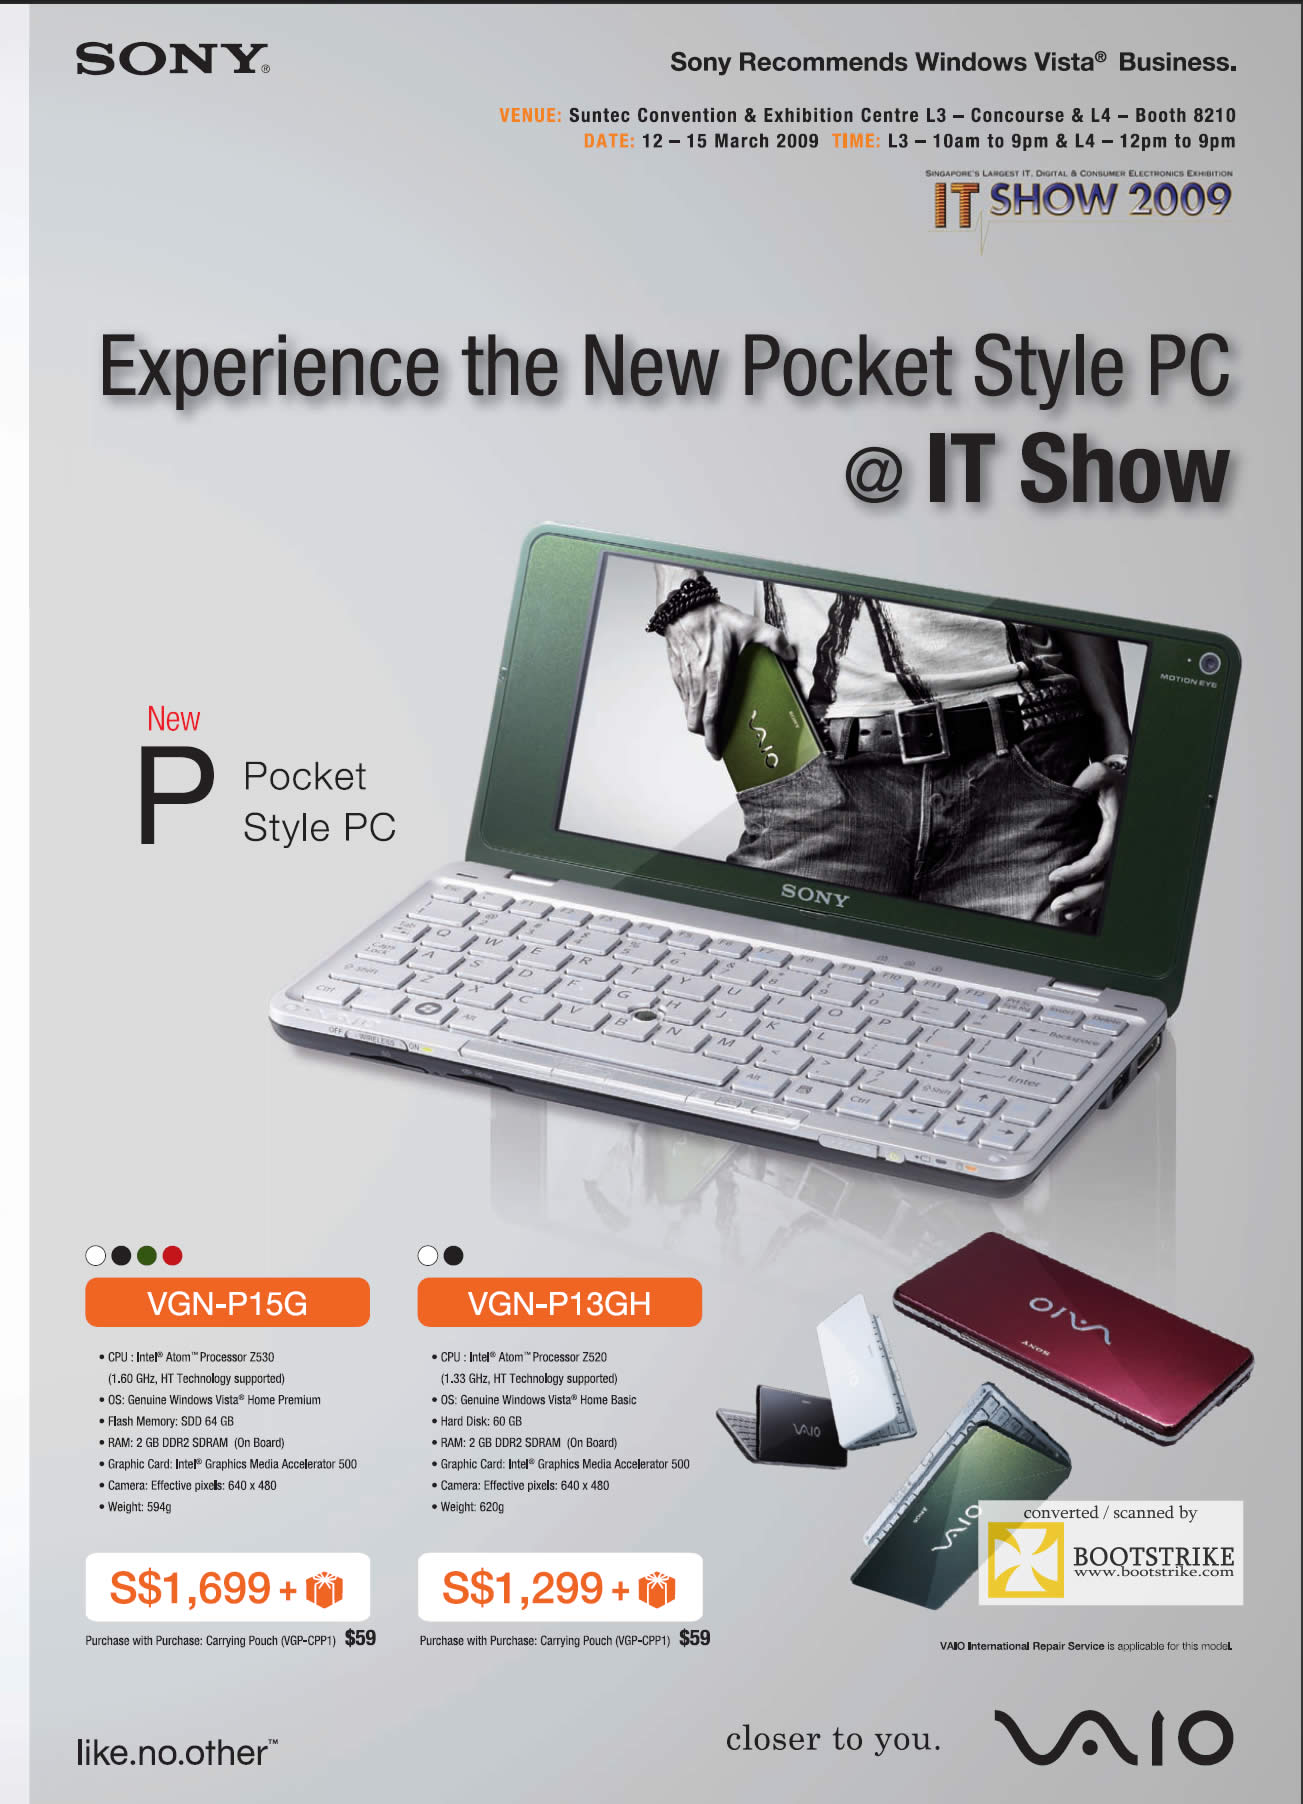 IT Show 2009 price list image brochure of Sony Pocket Style PC